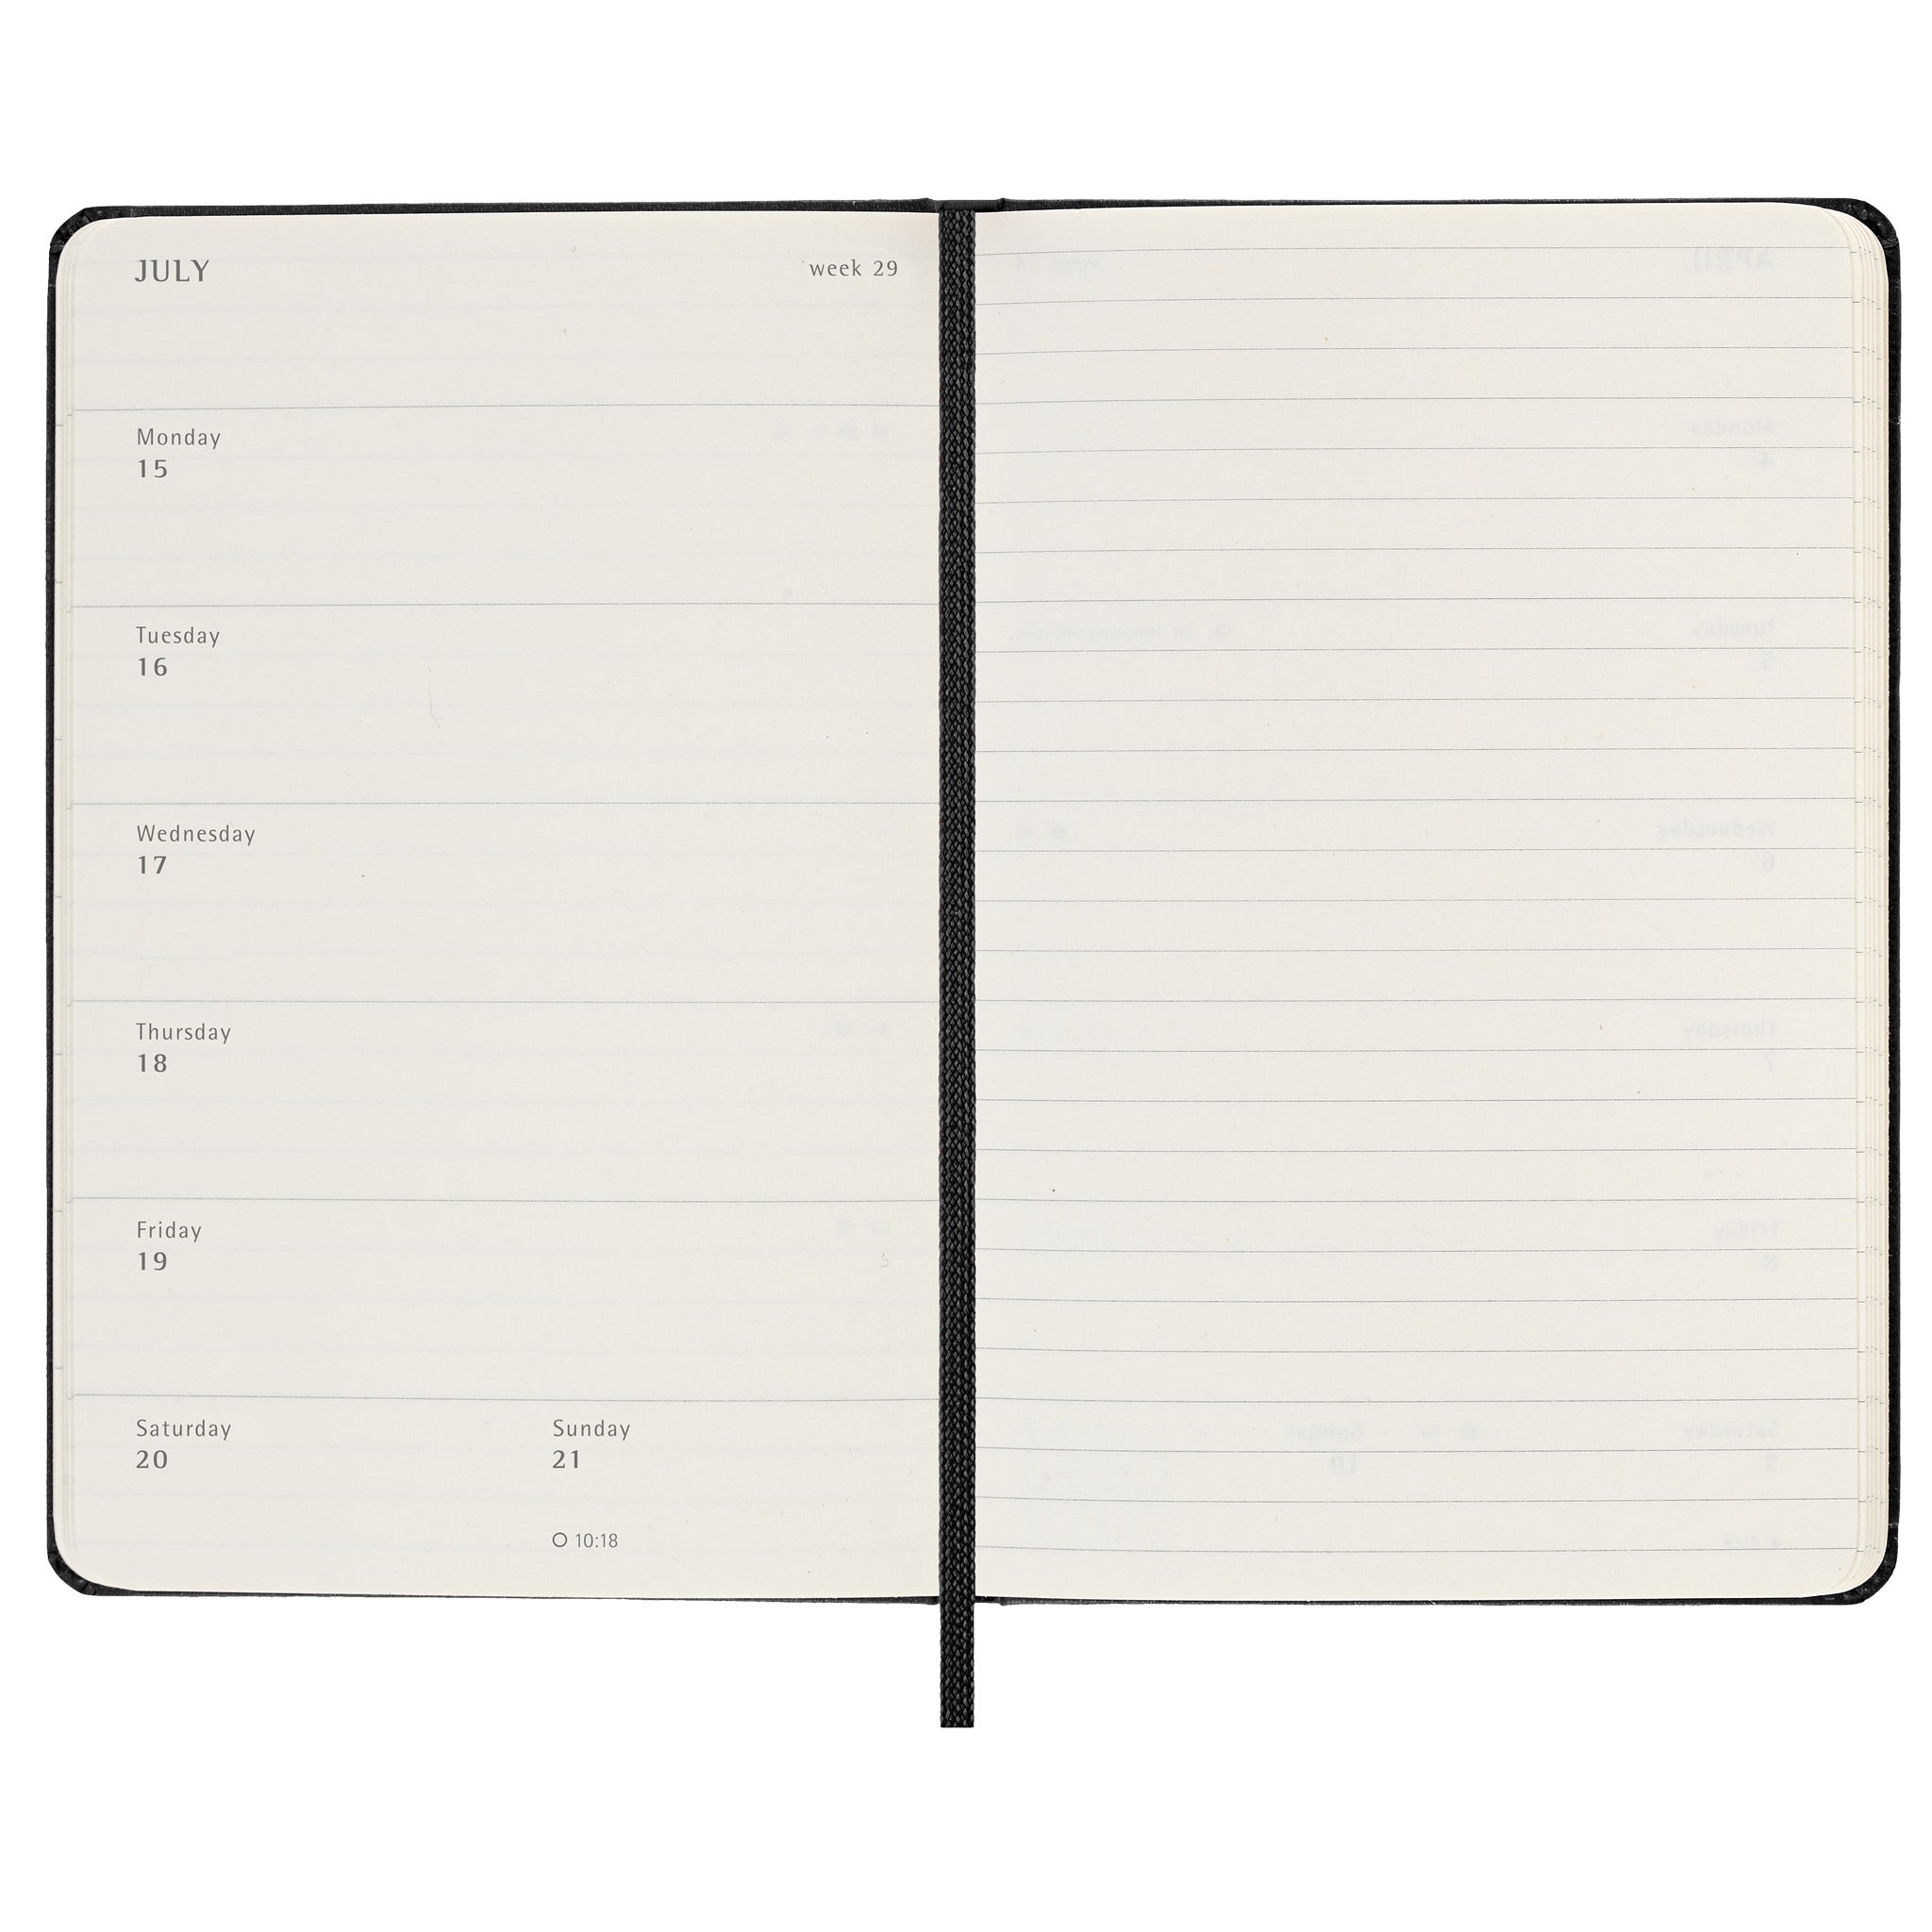 Classic Planner 2023-2024 Large Weekly, hard cover, 18 months